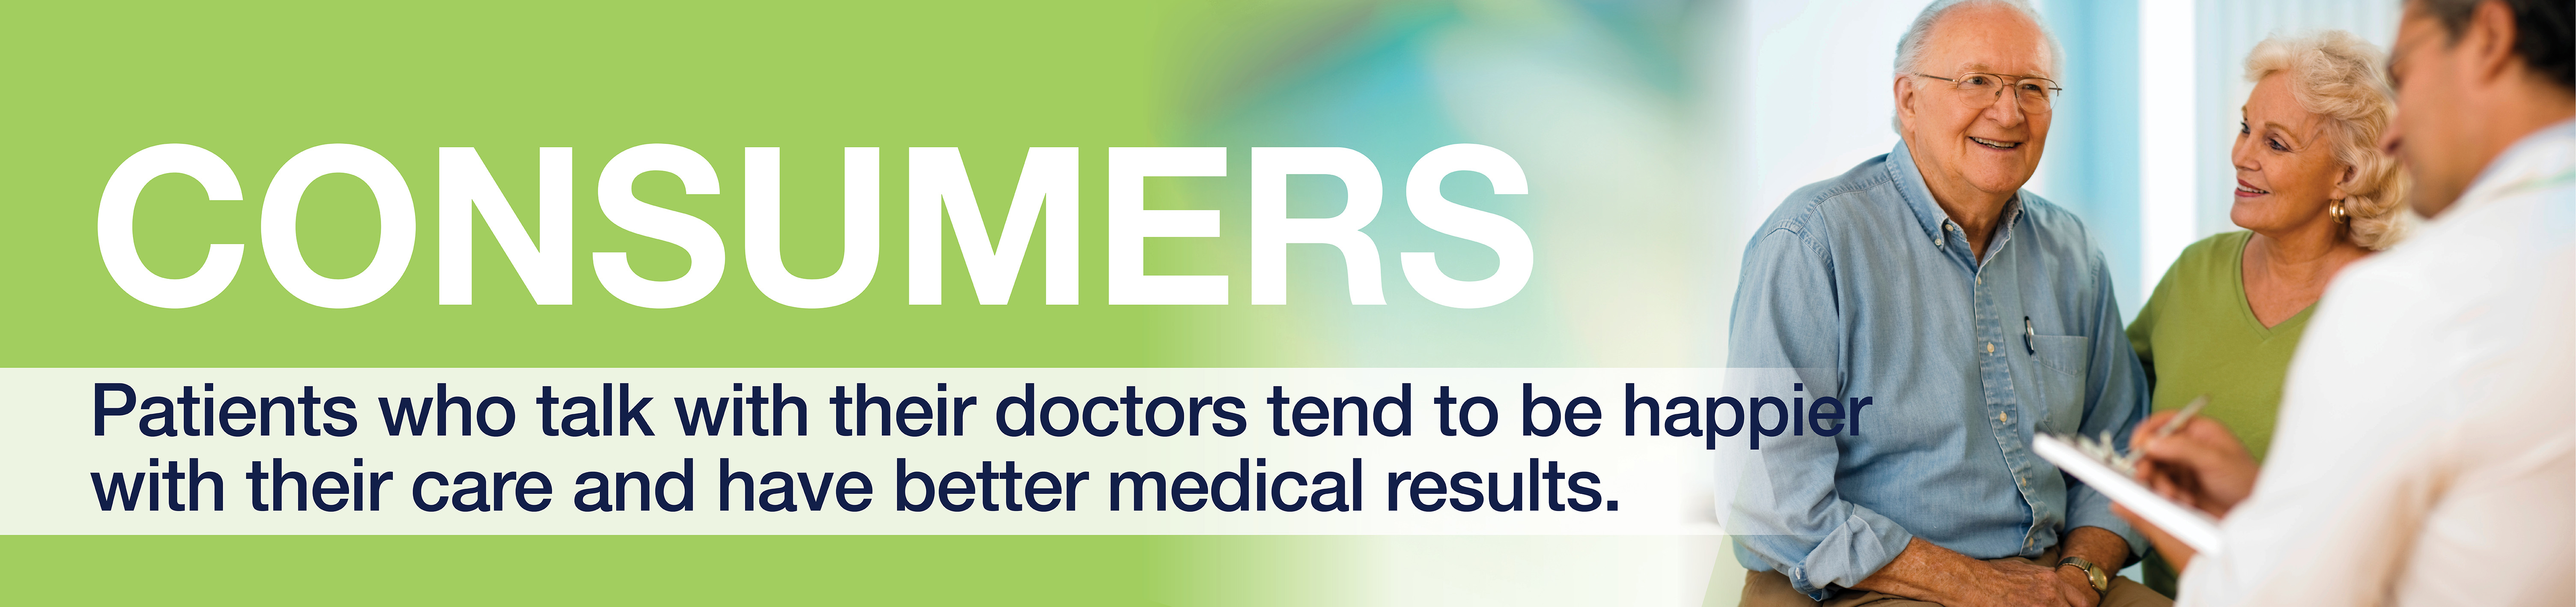 Consumers Banner: Patients who talk with their doctors tend to be happier with their care and have better medical results.